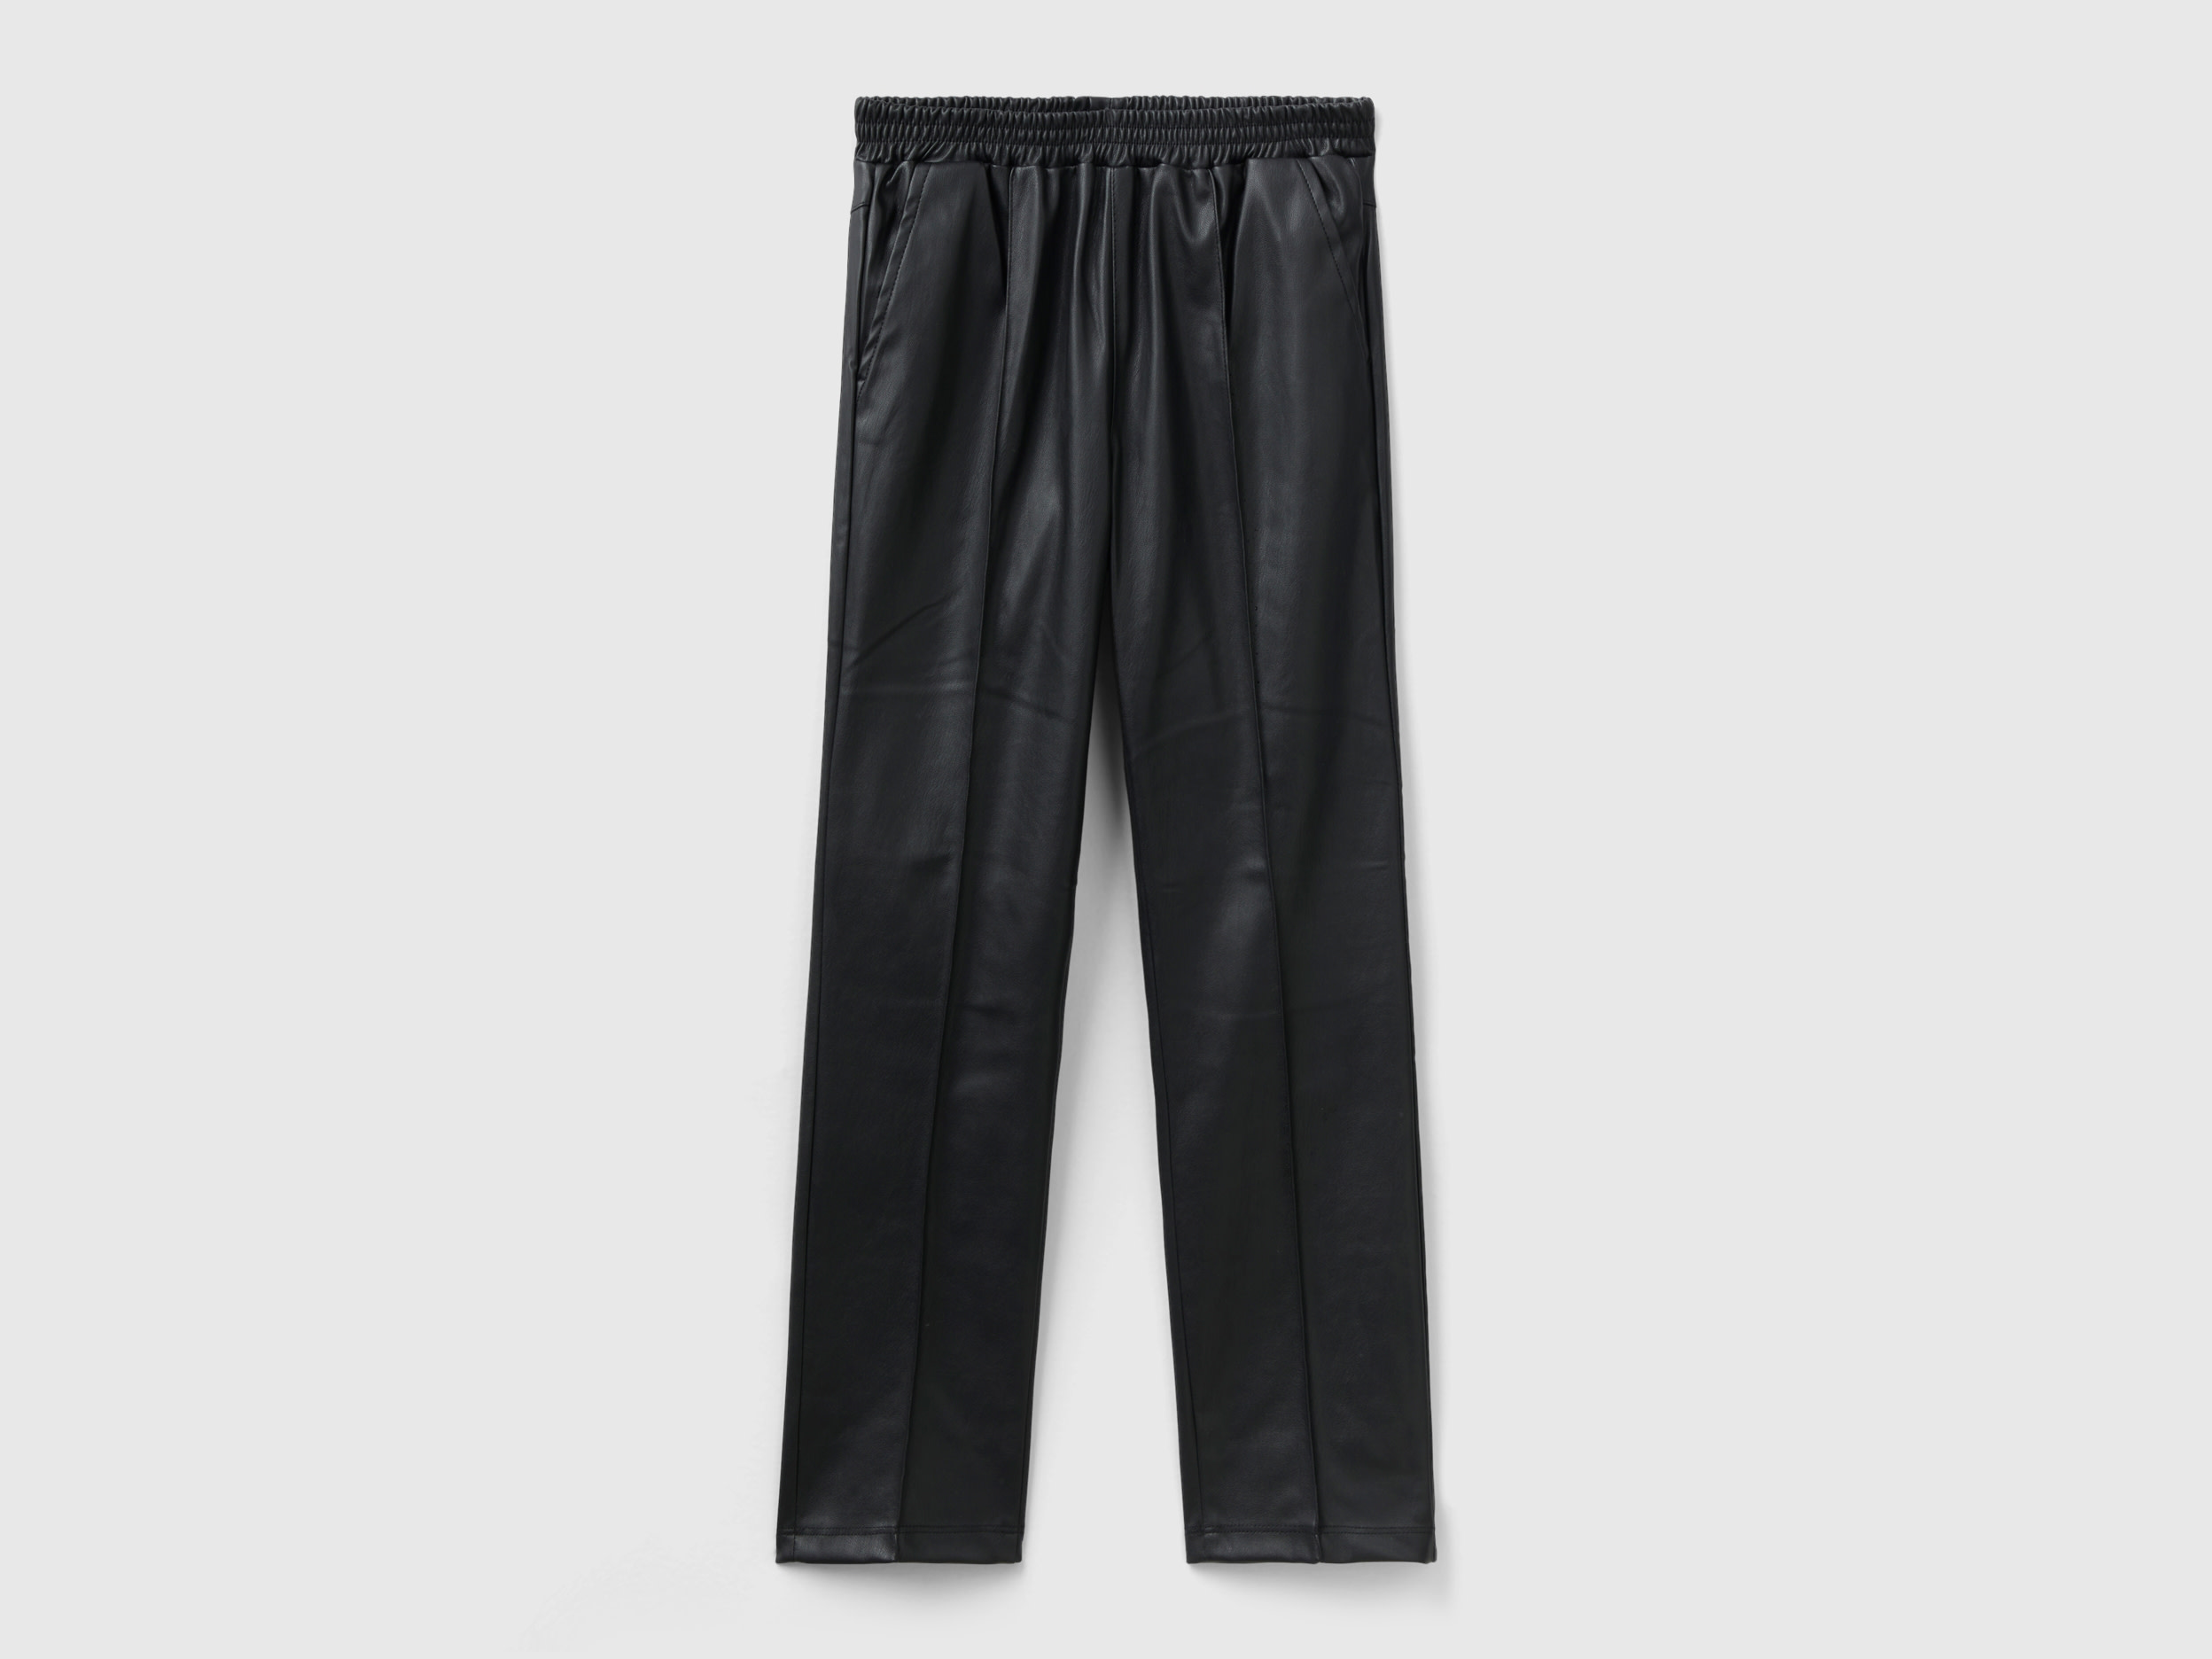 Benetton, Slim Fit Trousers In Imitation Leather Fabric, size 2XL, Black, Kids